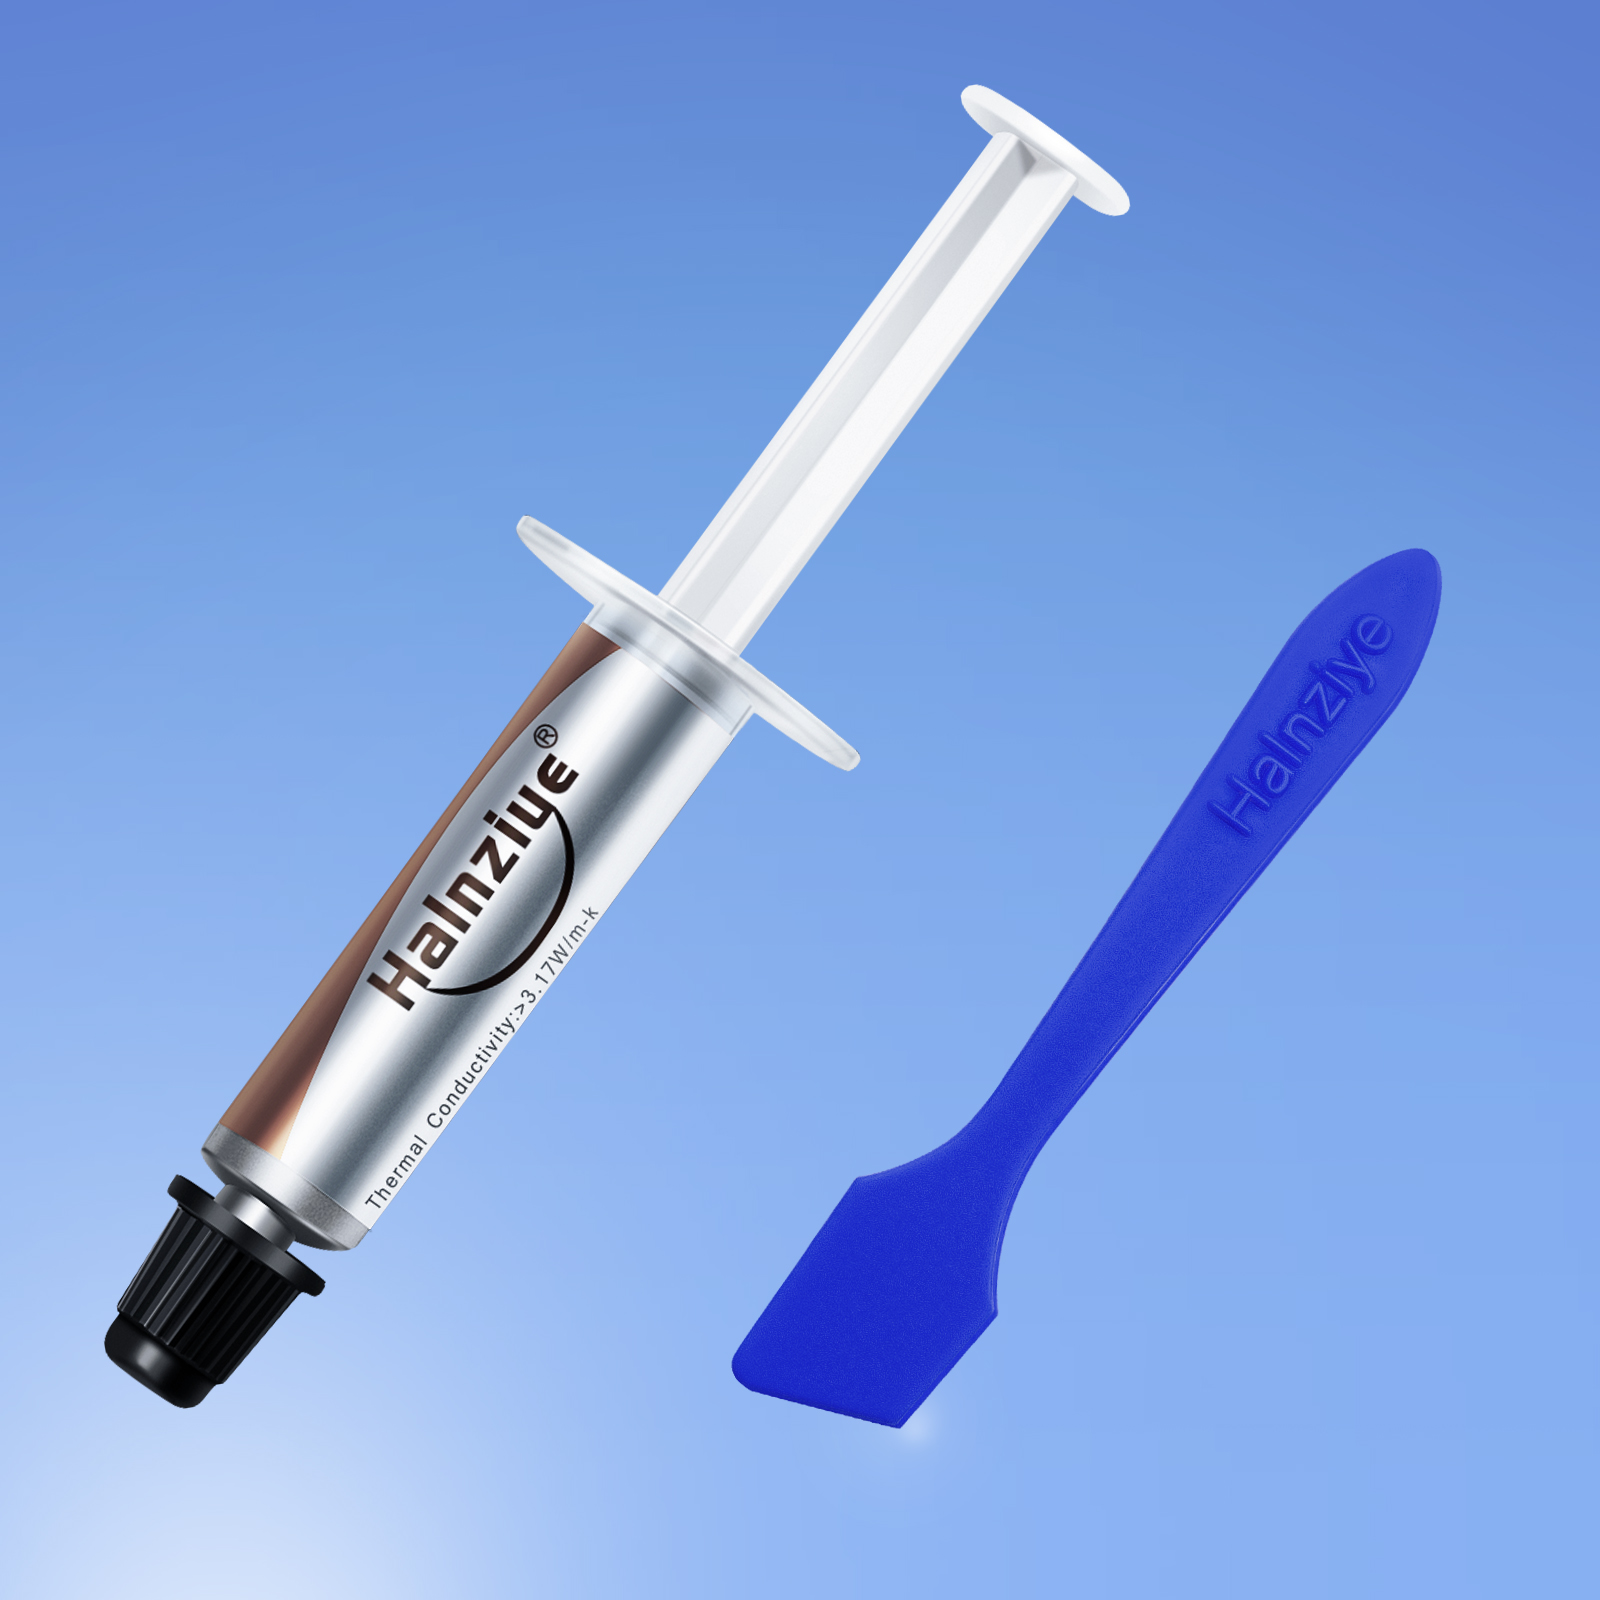 2.8g/Ml 1.5W/M.K Thermal Conductive Silicone Grease For CPU